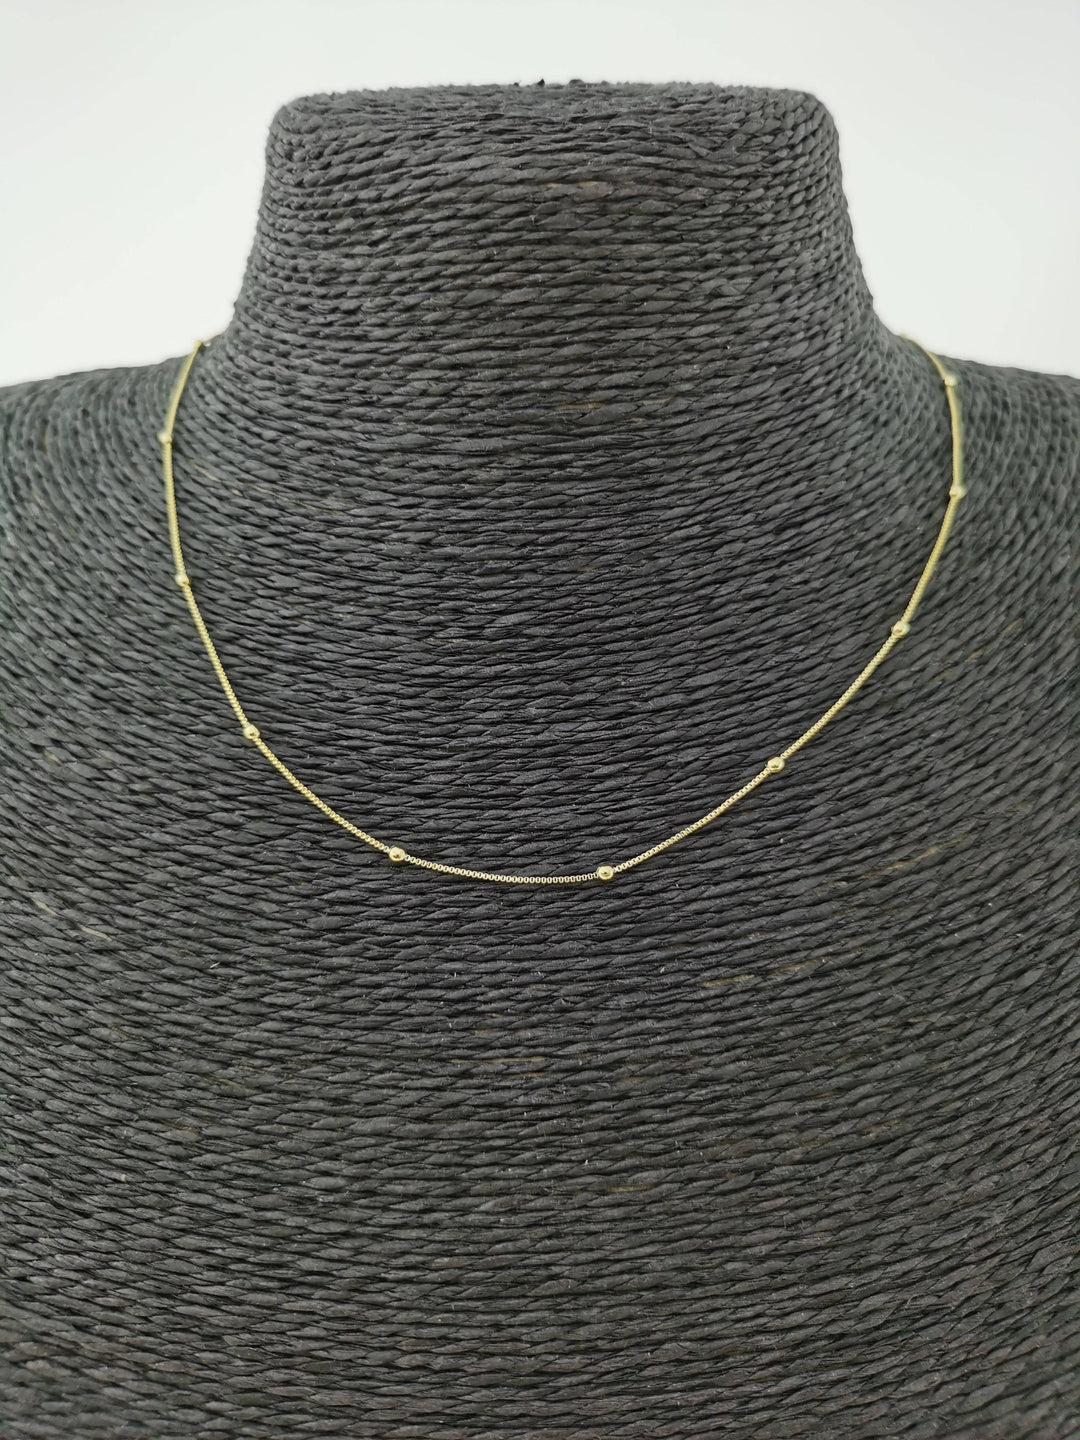 Aim Eternal - 14K Gold Filled Box Necklace Chain with Ball Beads